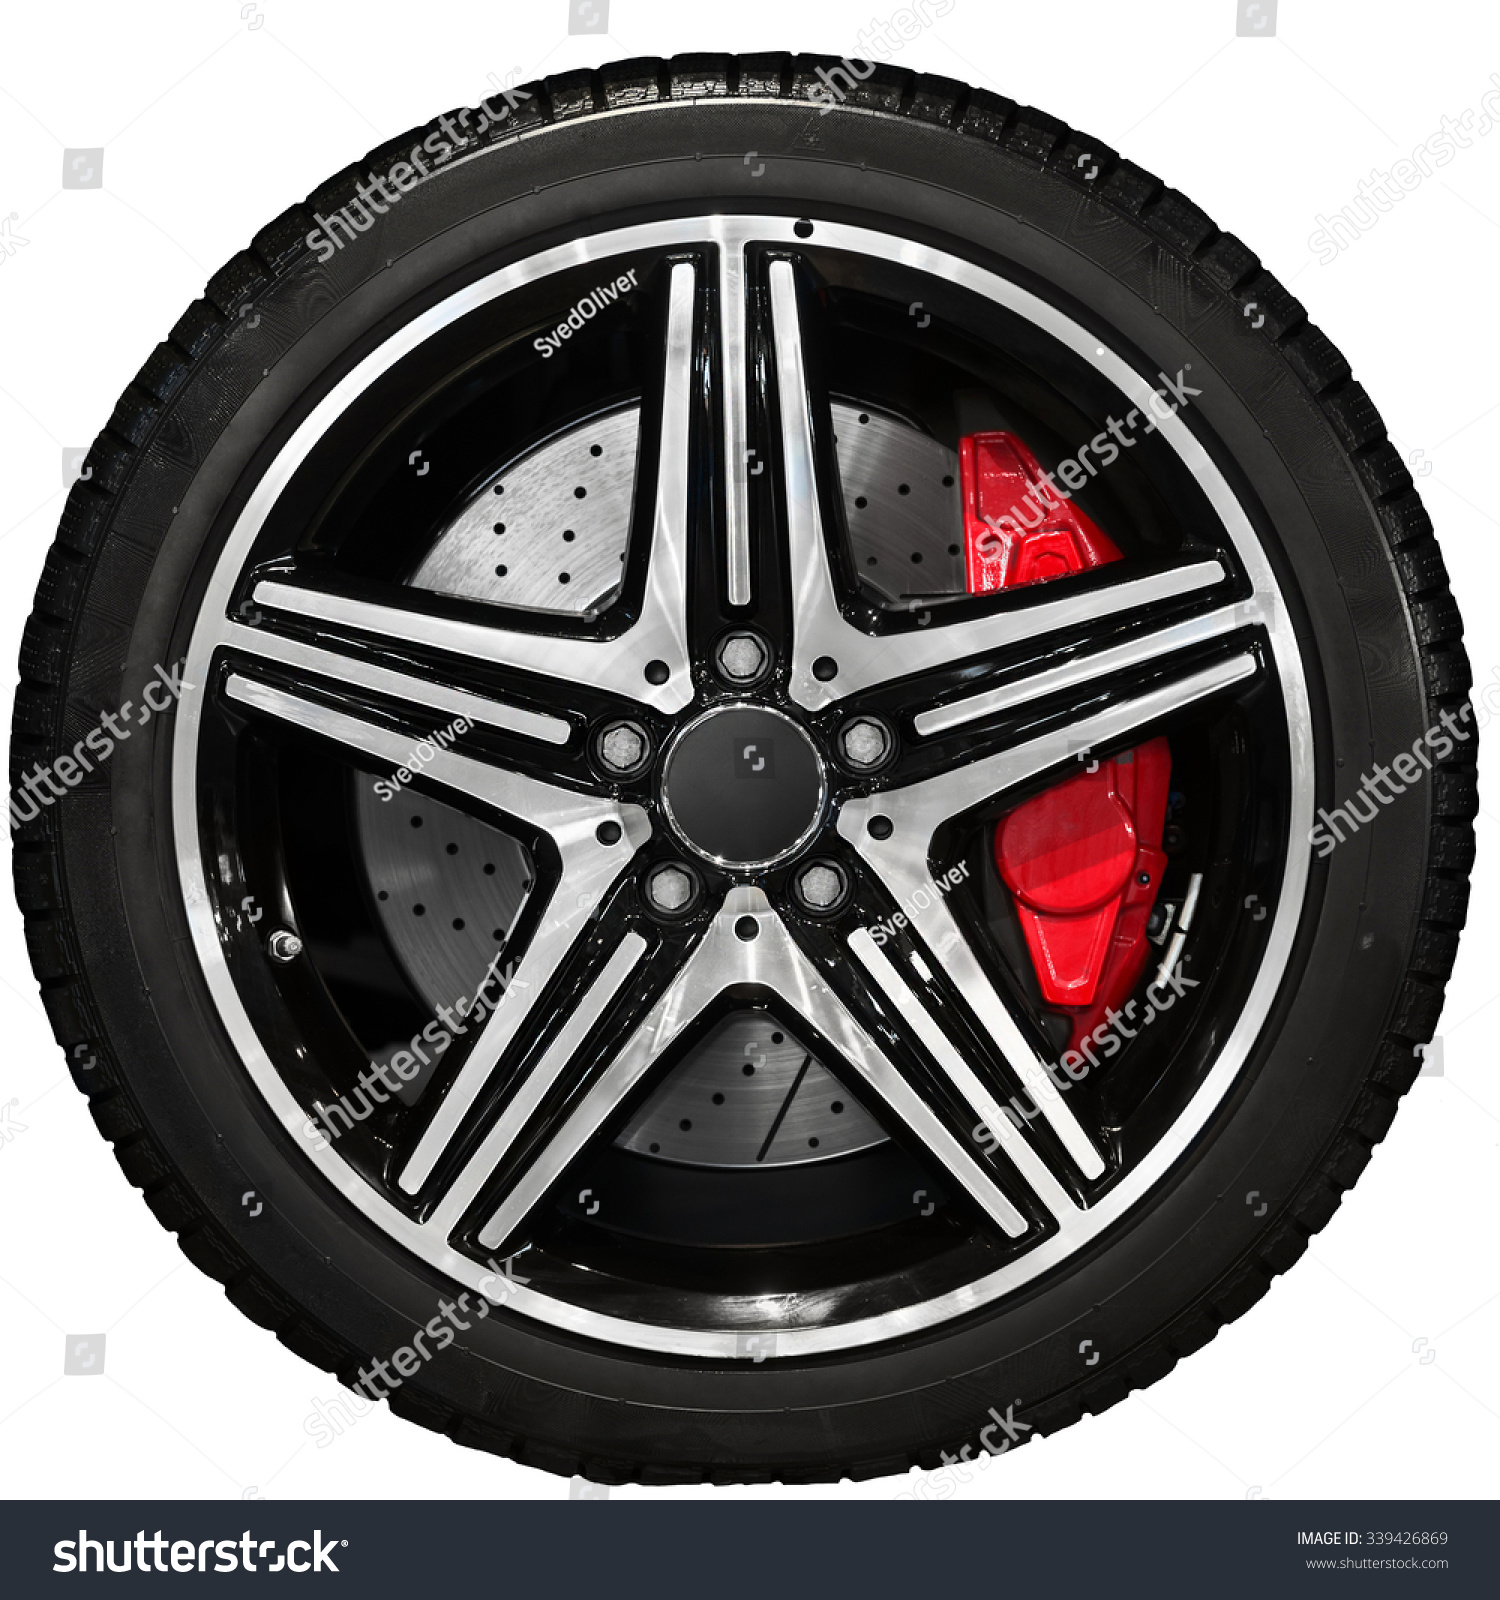 New car tyre closeup photo with detail #339426869